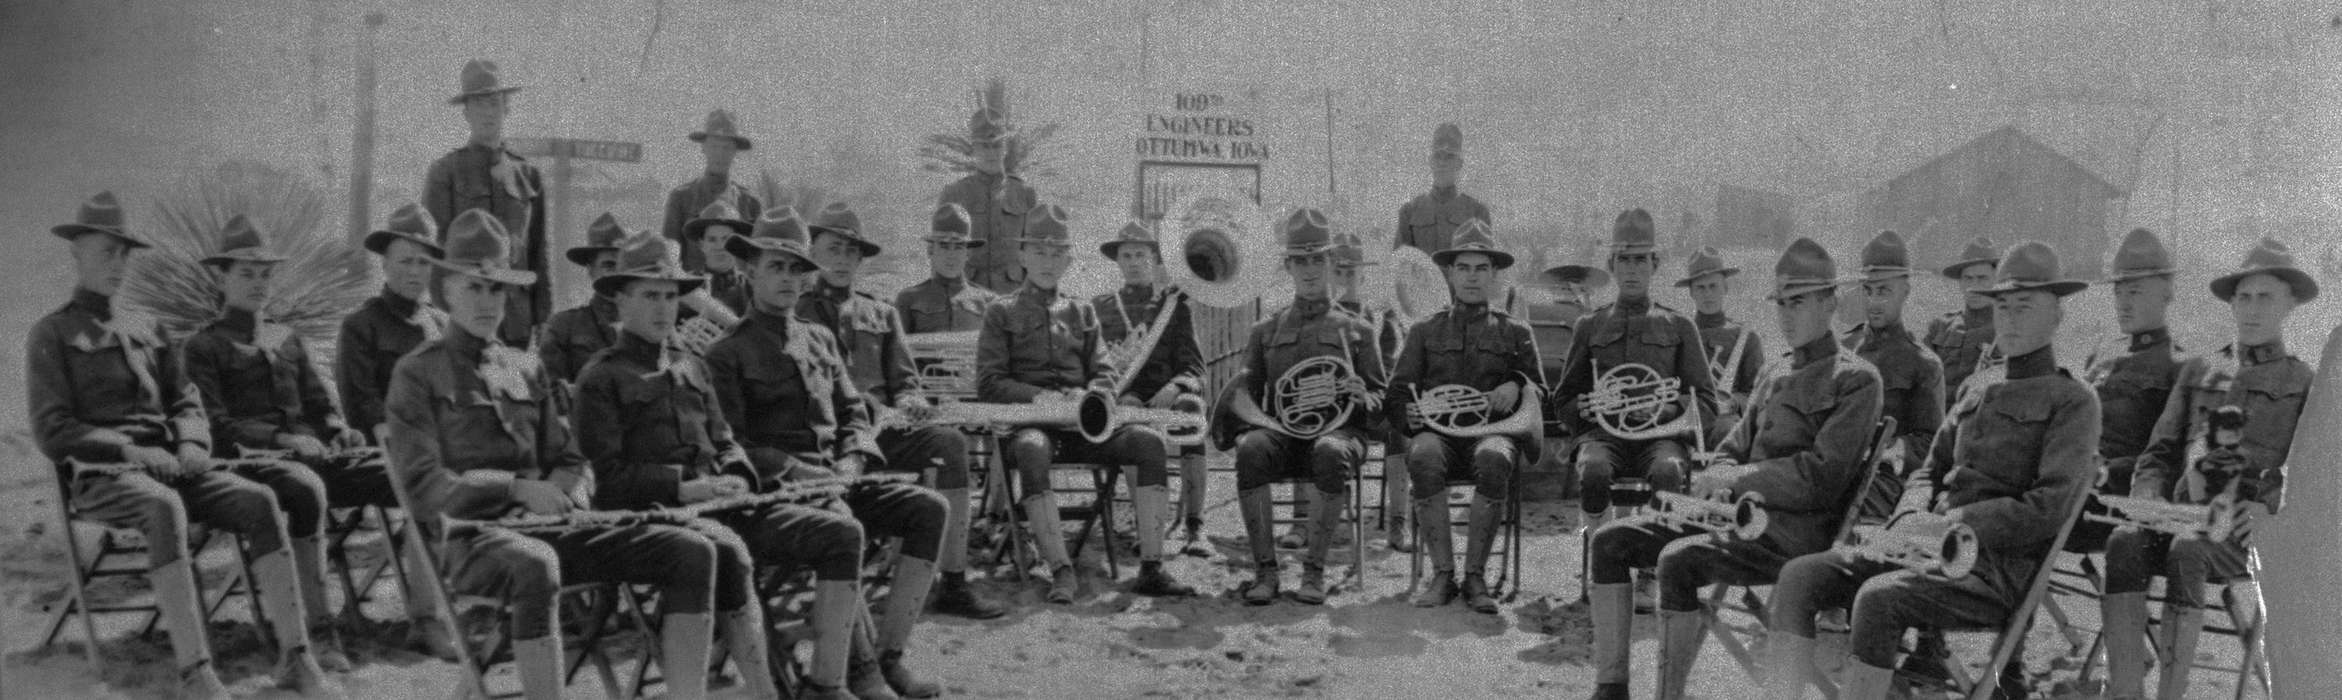 trumpet, USA, Iowa History, history of Iowa, french horn, Portraits - Group, Iowa, Lemberger, LeAnn, tuba, flute, military, band, Military and Veterans